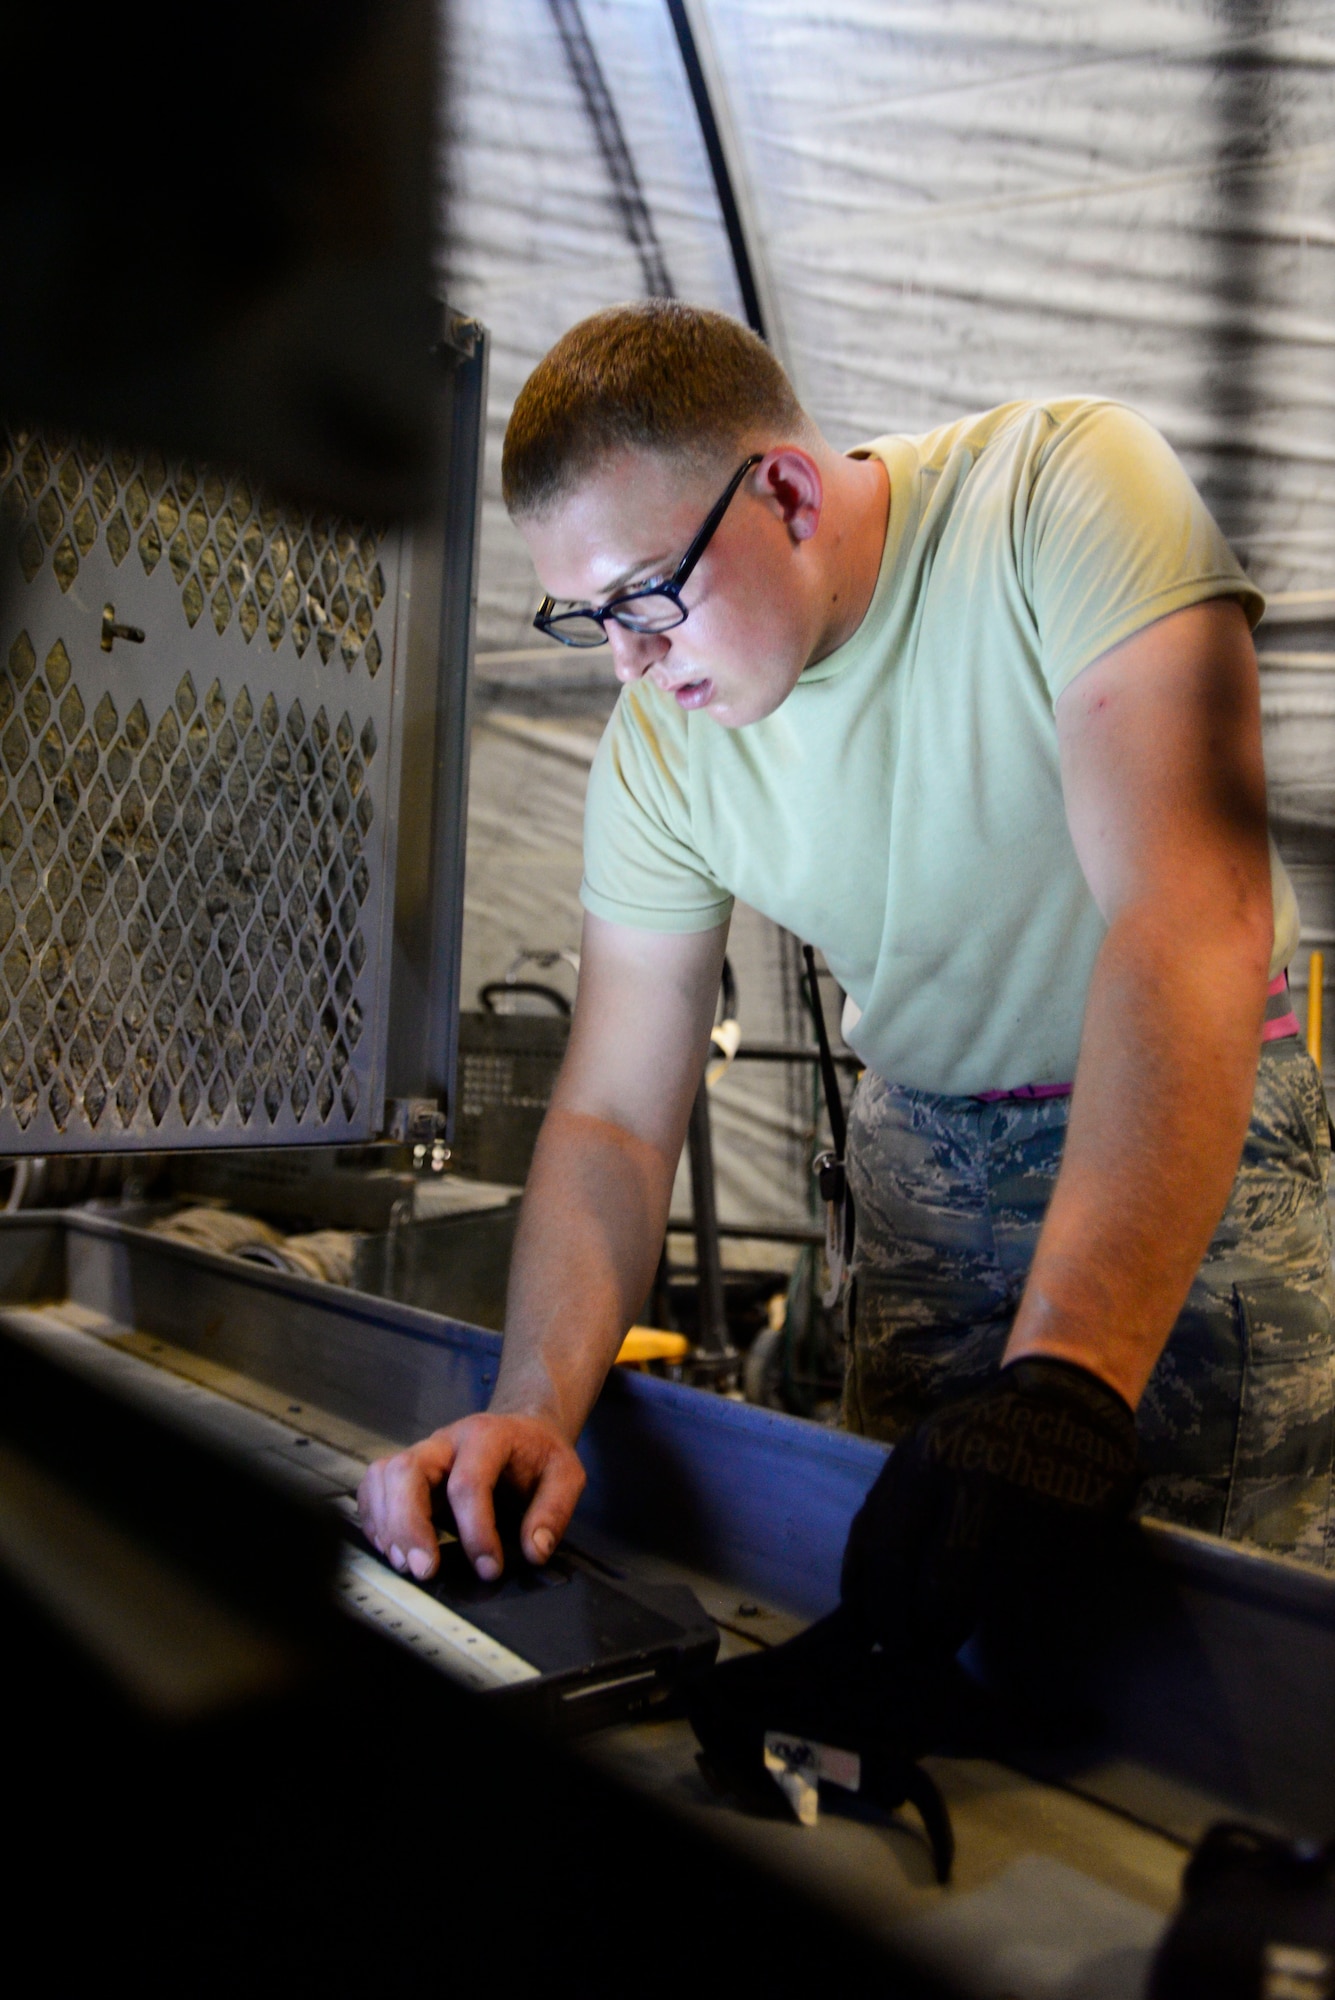 U.S. Air Force Senior Airman Brandon Smith, a 386th Expeditionary Aircraft Maintenance Squadron Aerospace Ground Equipment technician troubleshoots equipment at an undisclosed location in Southwest Asia, June 11, 2015. Smith and Tech. Sgt. Michial Smith deployed together as a father and son duo. (U.S. Air Force photo by Senior Airman Racheal E. Watson/Released)